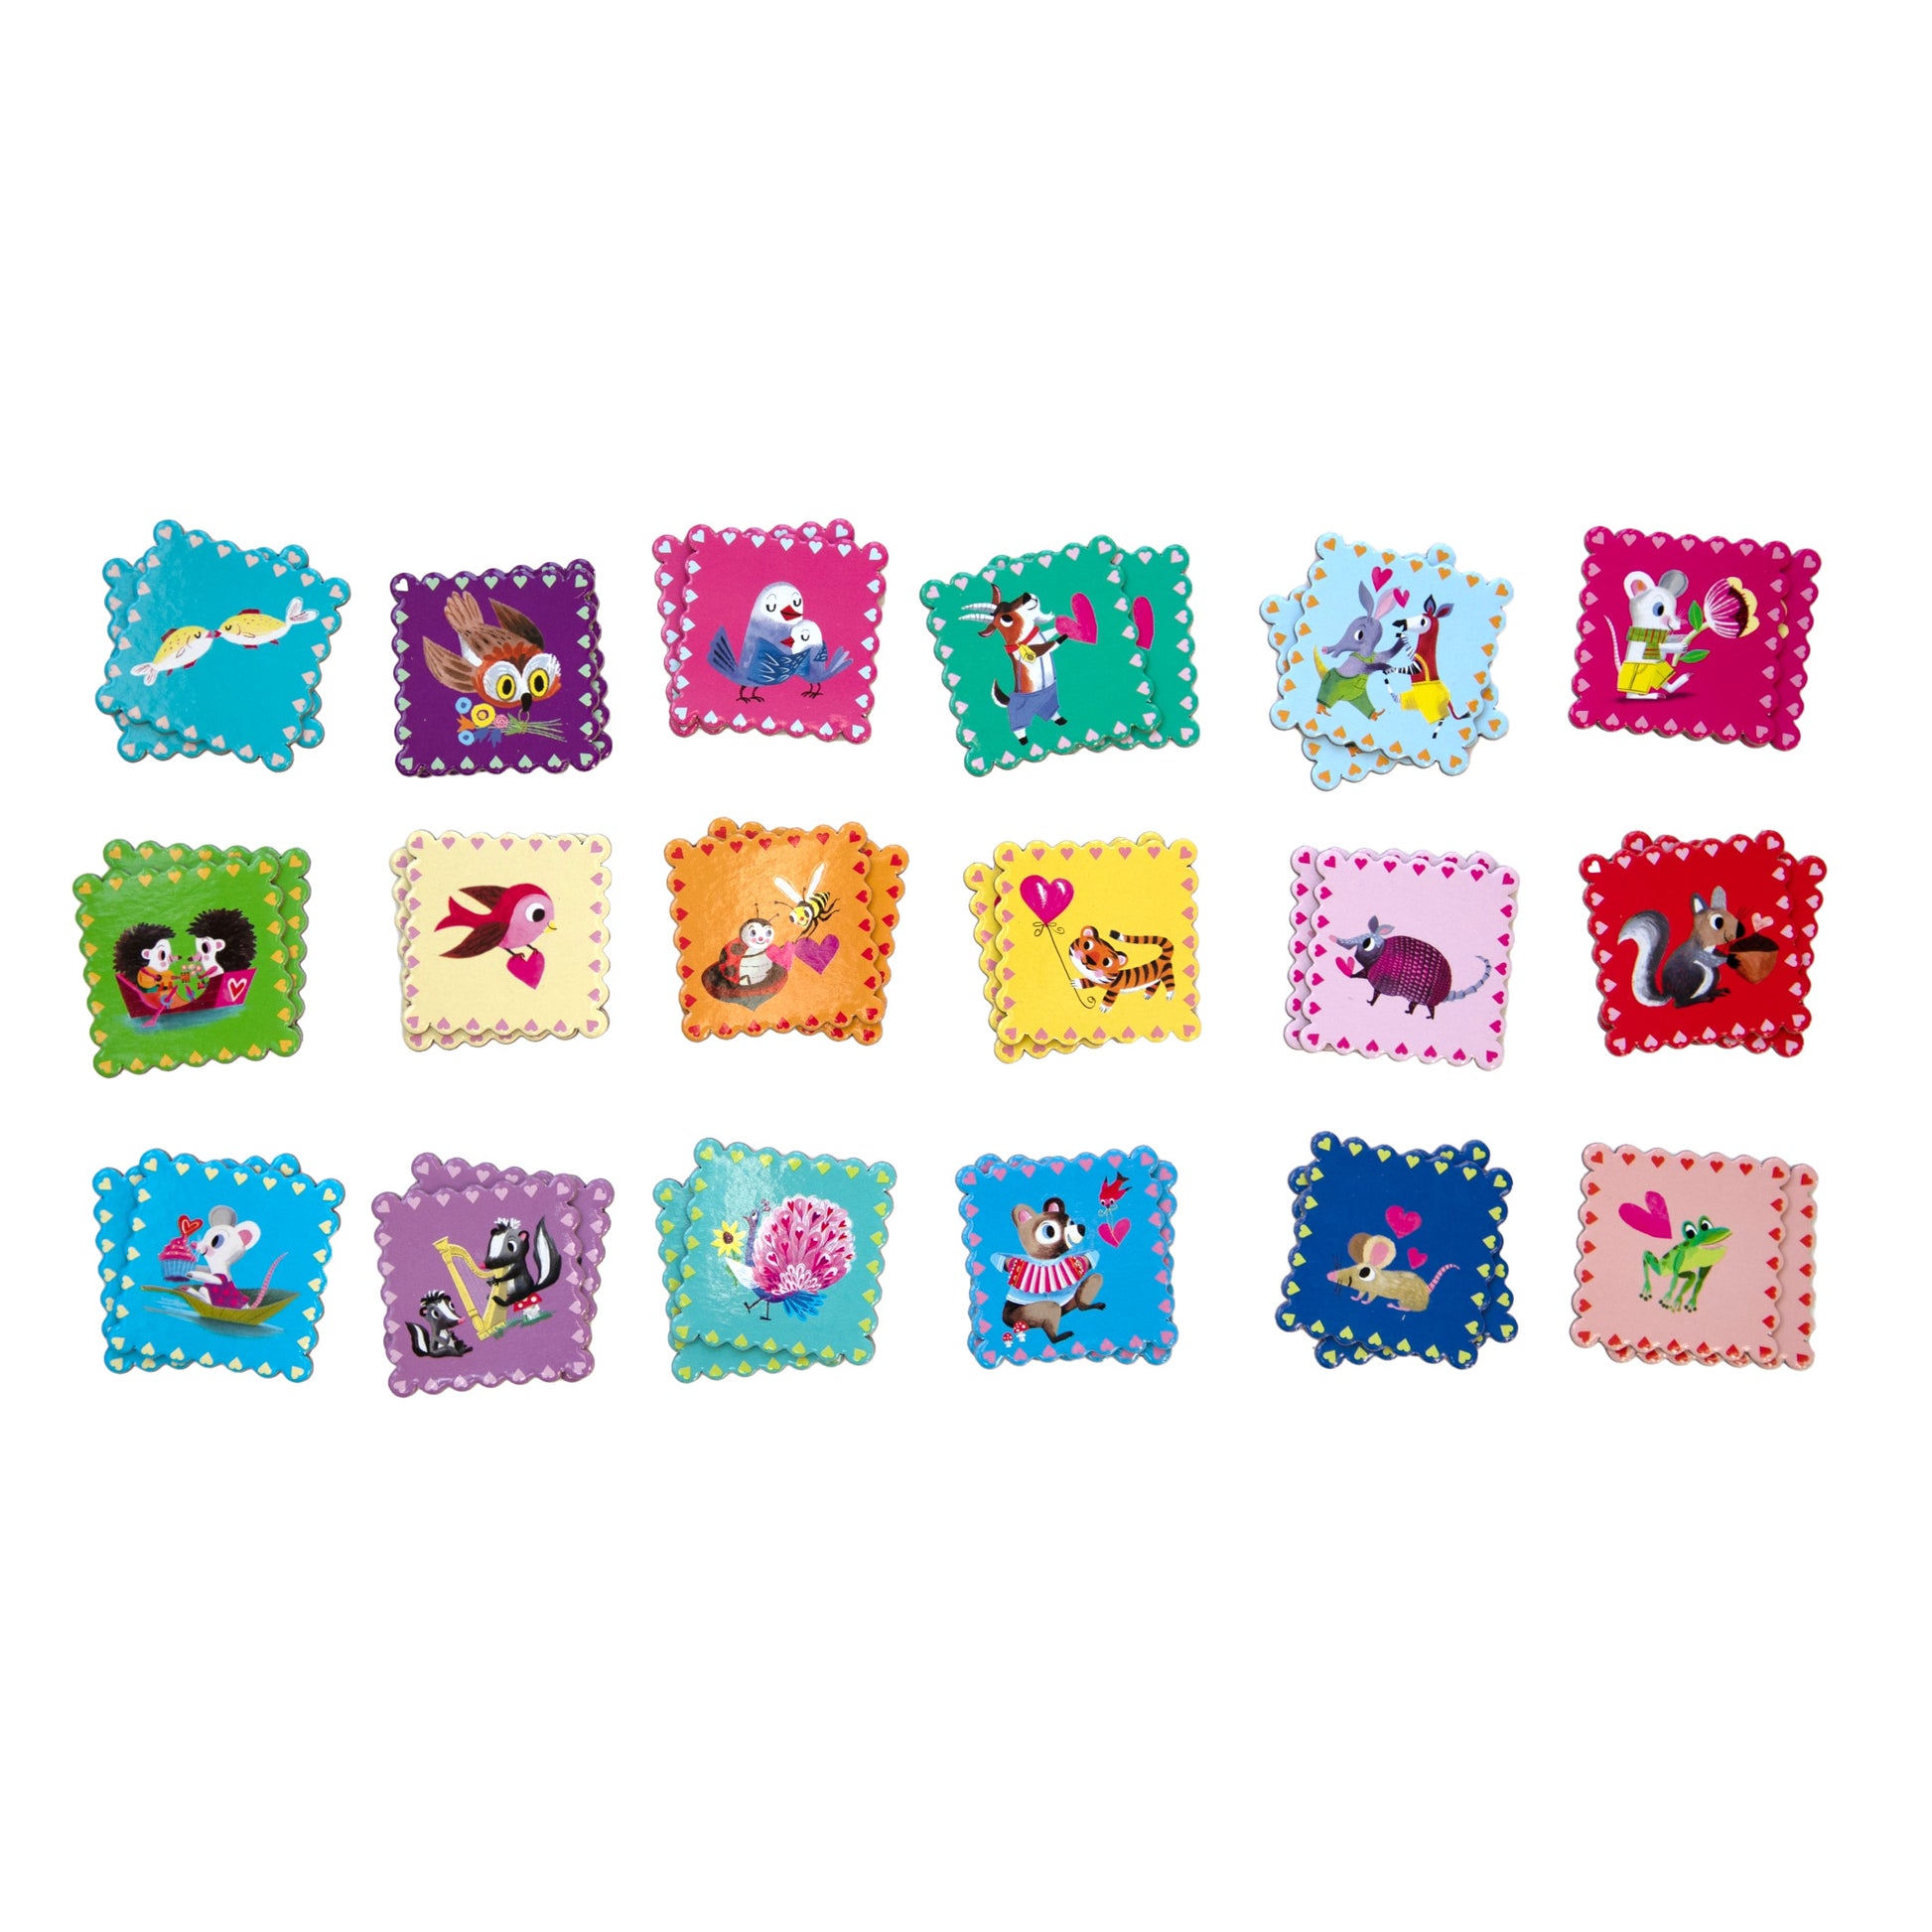 Love Little Square Memory Game Unique Valentines Day Gifts for Kids 3+